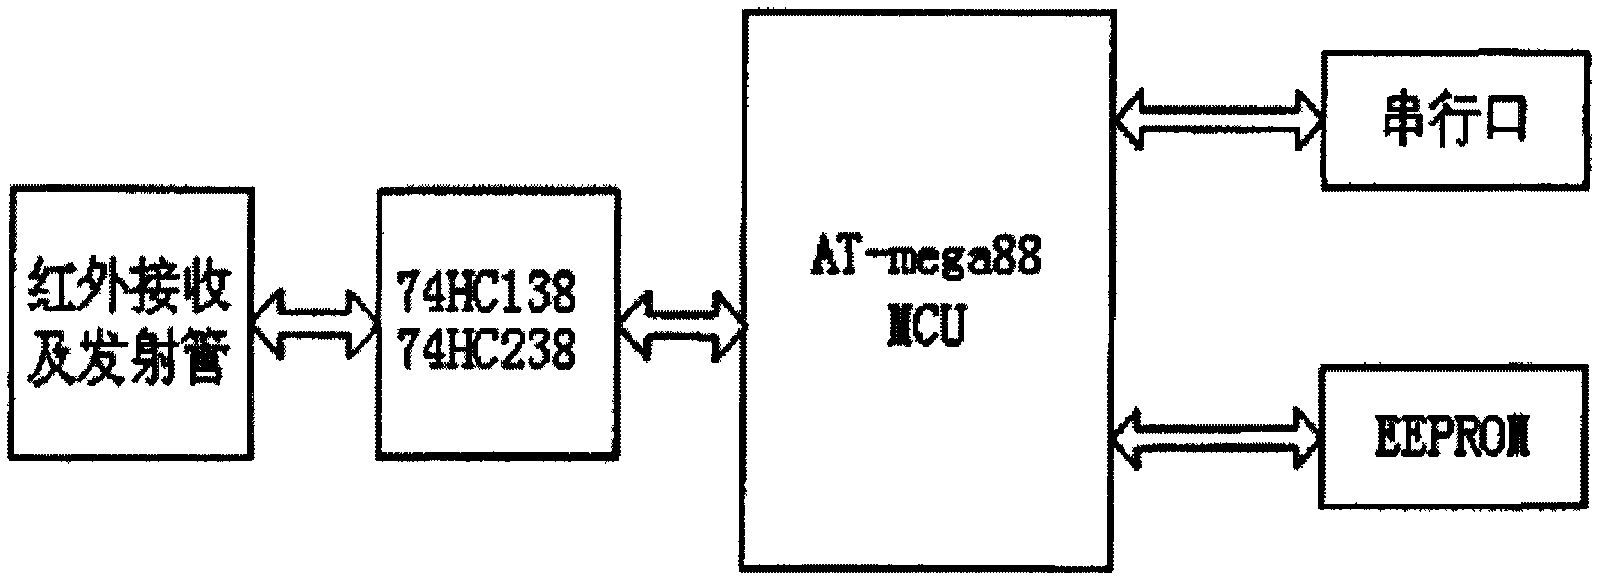 Large-size high-resolution infrared touch screen based on ATmega88